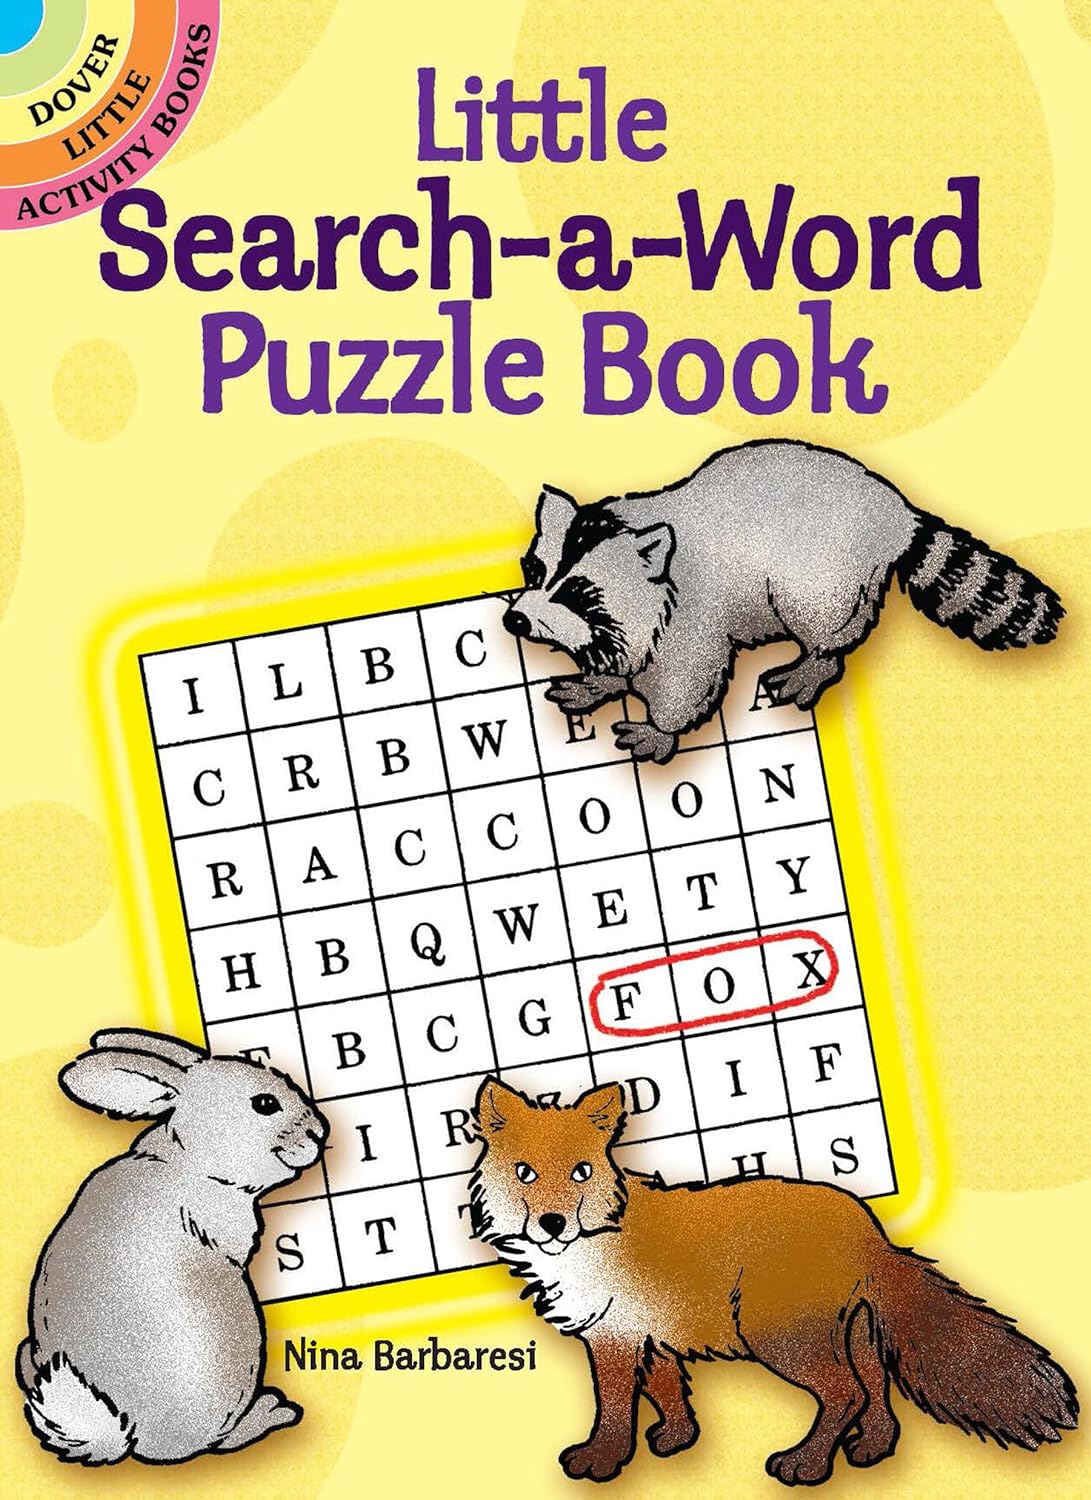 Little Search-a-Word Puzzle Book